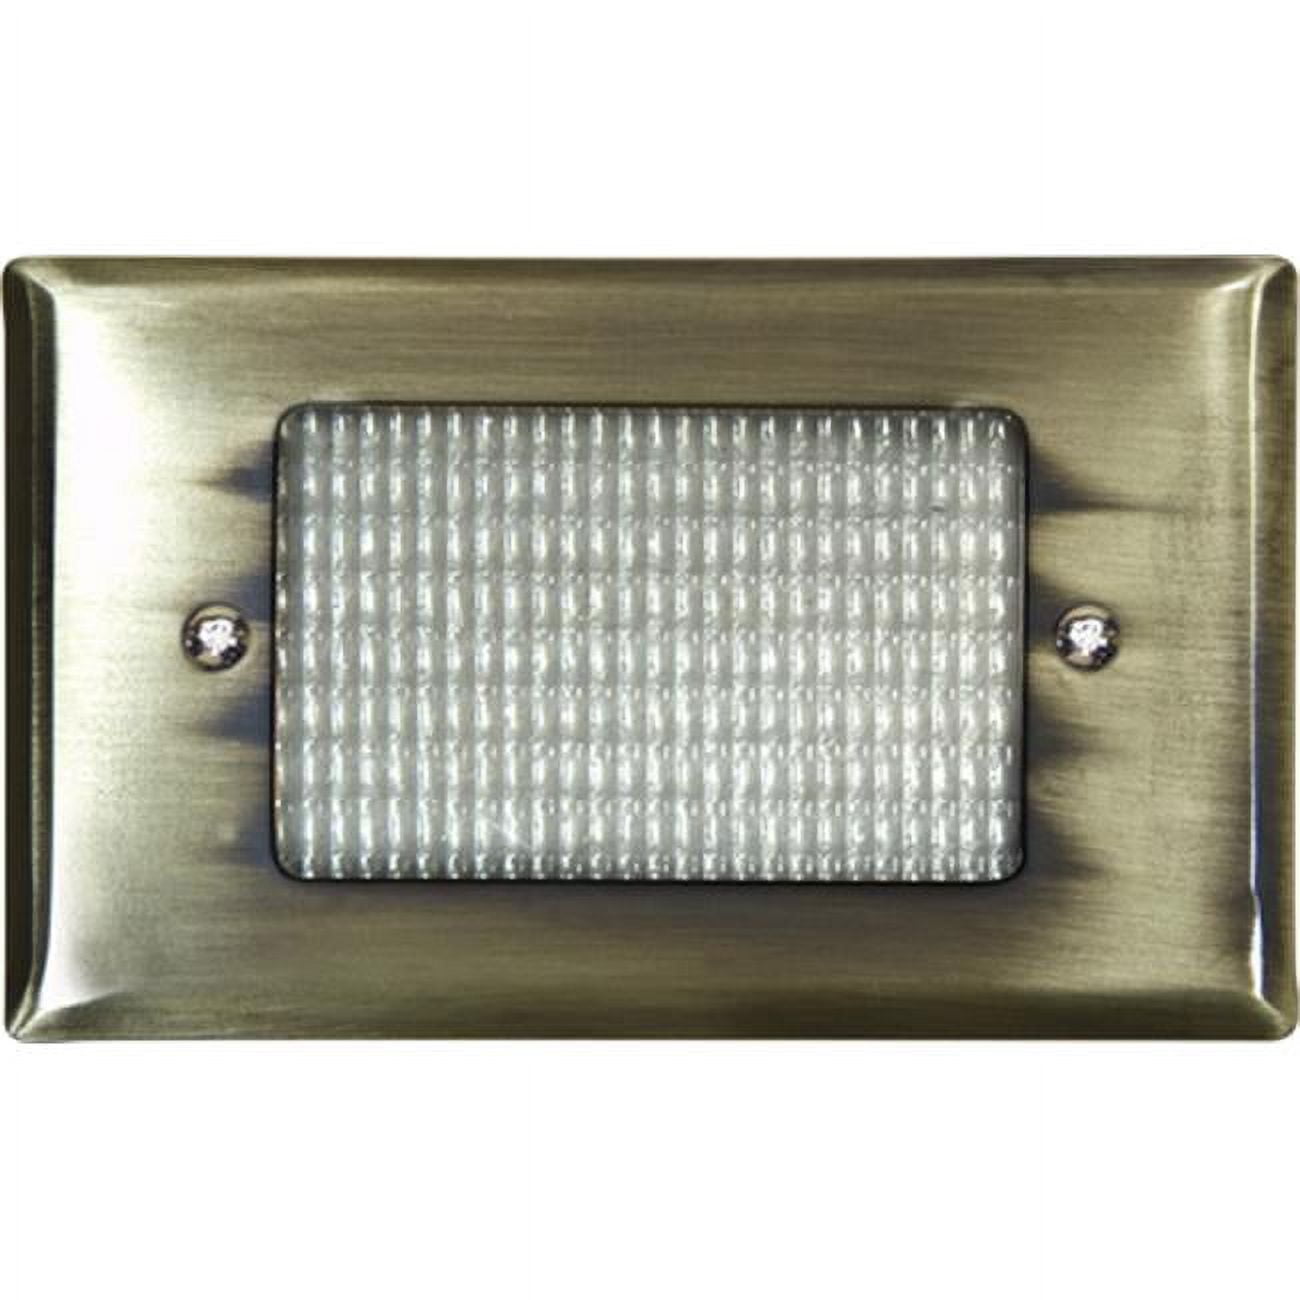 Picture of Dabmar Lighting LV618-ABS Brass Recessed Open Face Brick, Step & Wall Light, Antique Brass - 1.95 x 4.83 x 3.10 in.